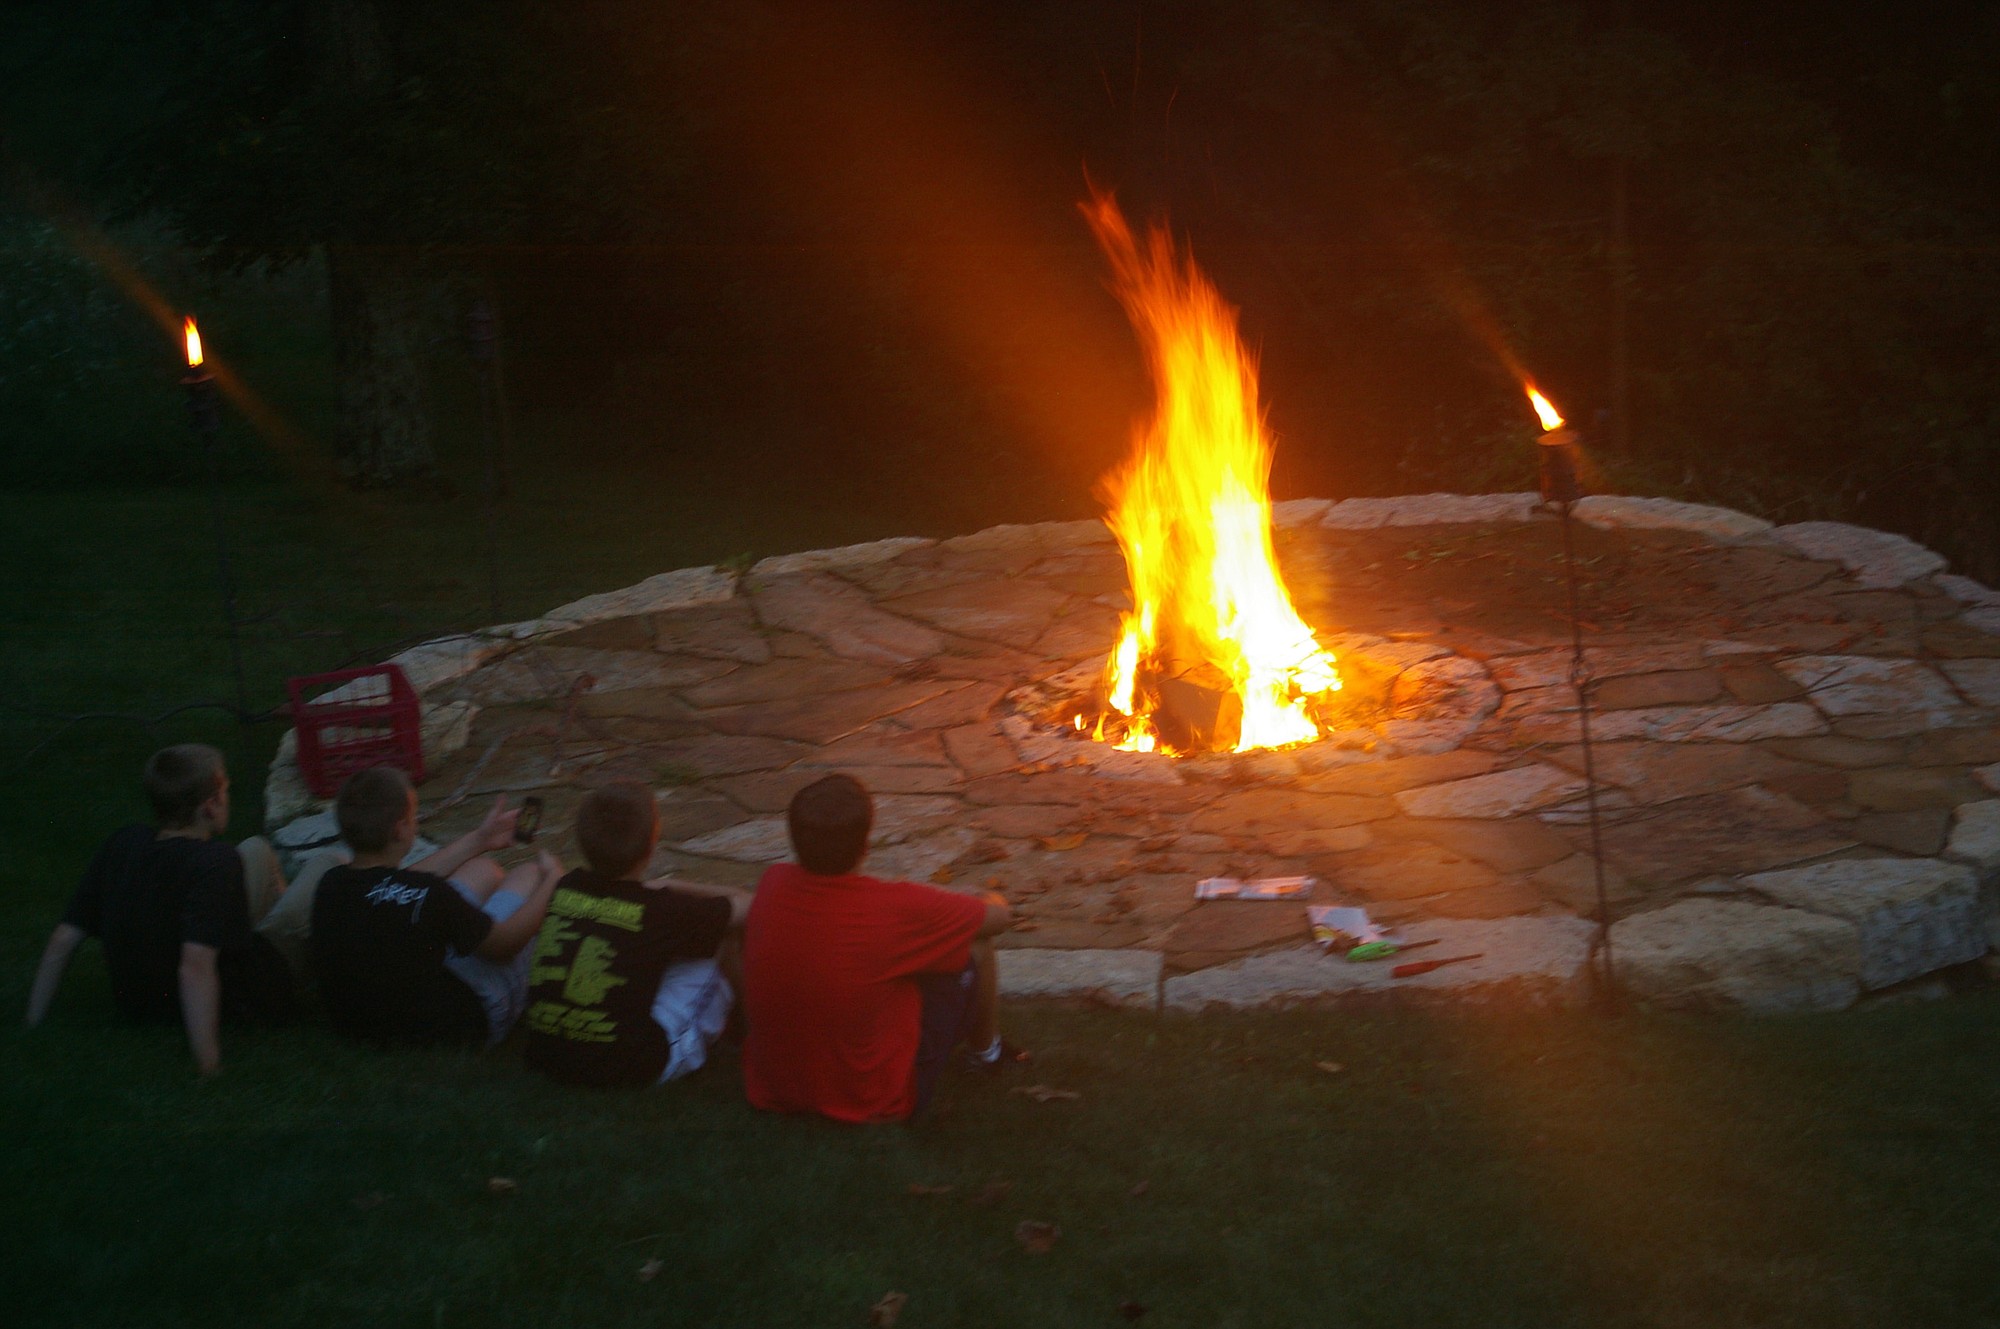 Susan Vanderwiel and her family enjoy this fire pit year-round at their lake house in Apple River, Ill.